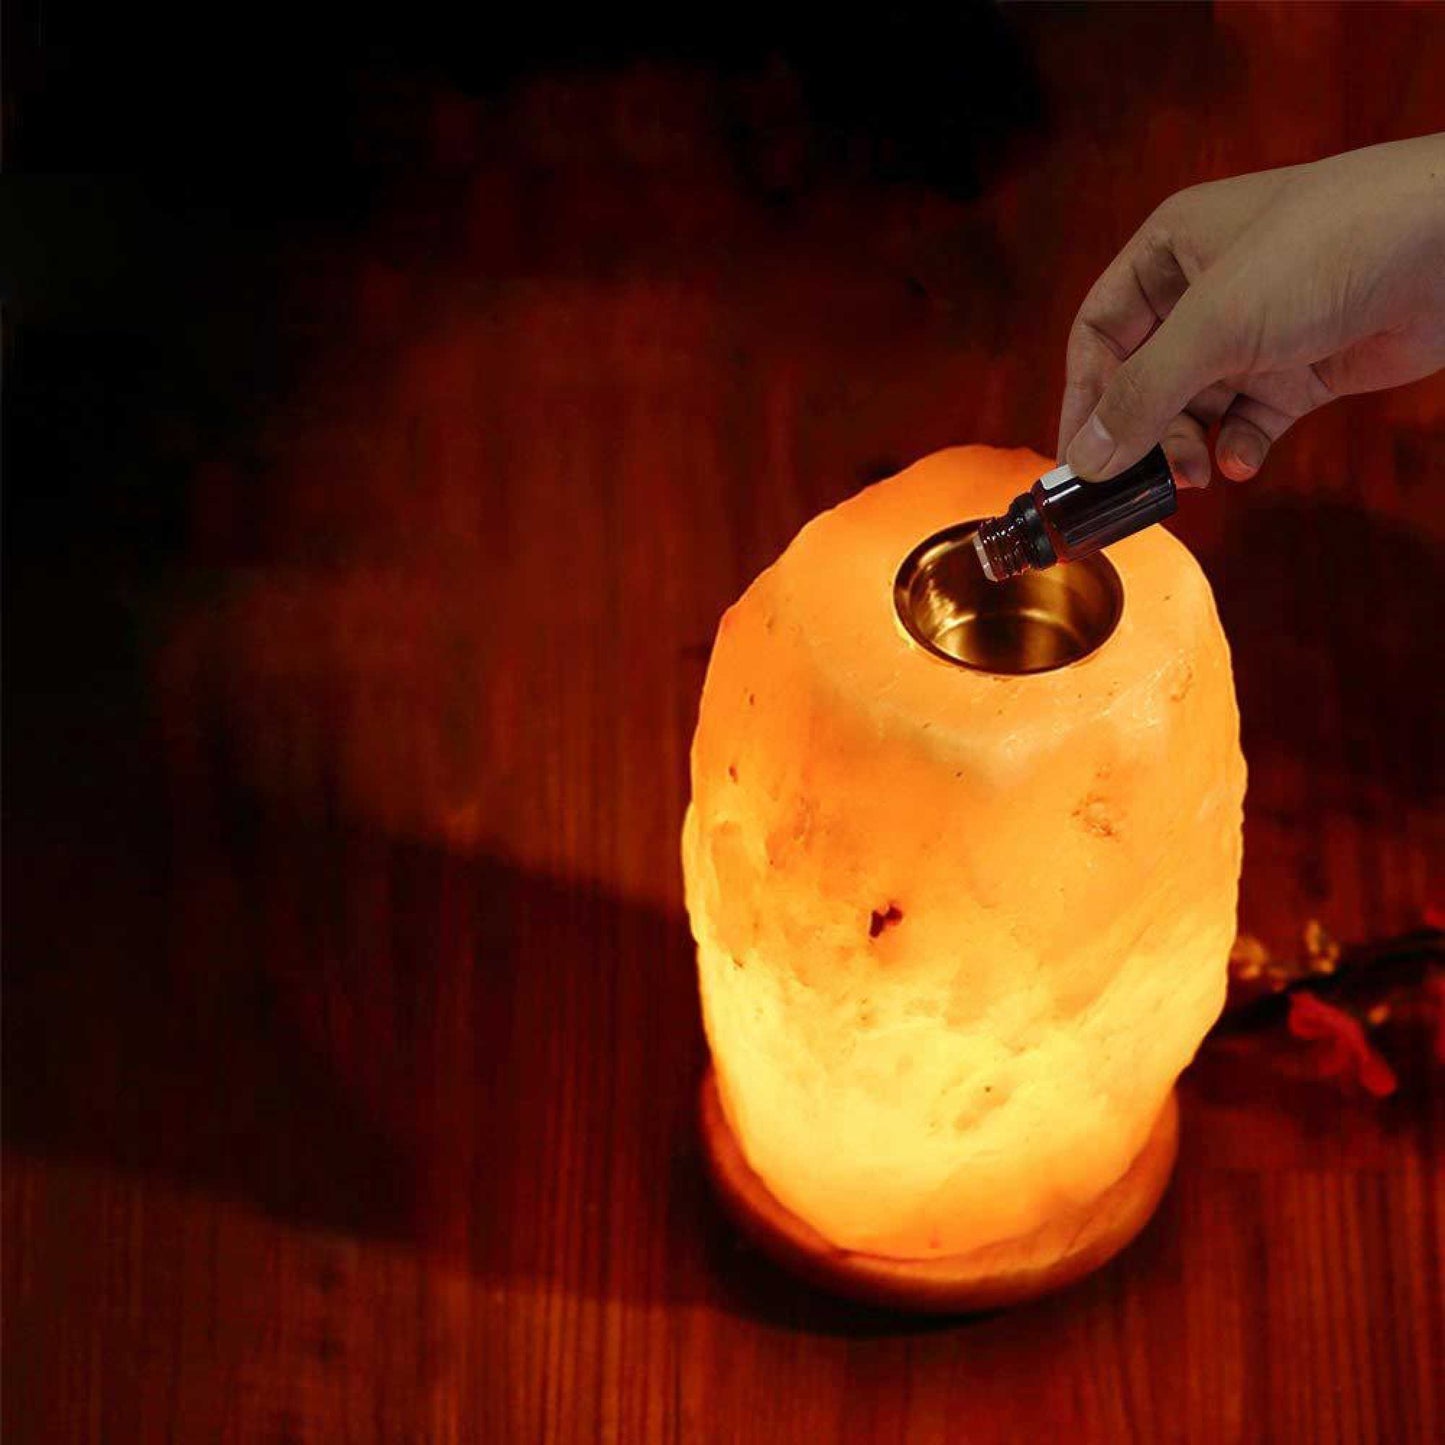 12V 12W 3-5kg Himalayan Pink Salt Diffuser Essential Oil Lamp Aromatherapy On/Off